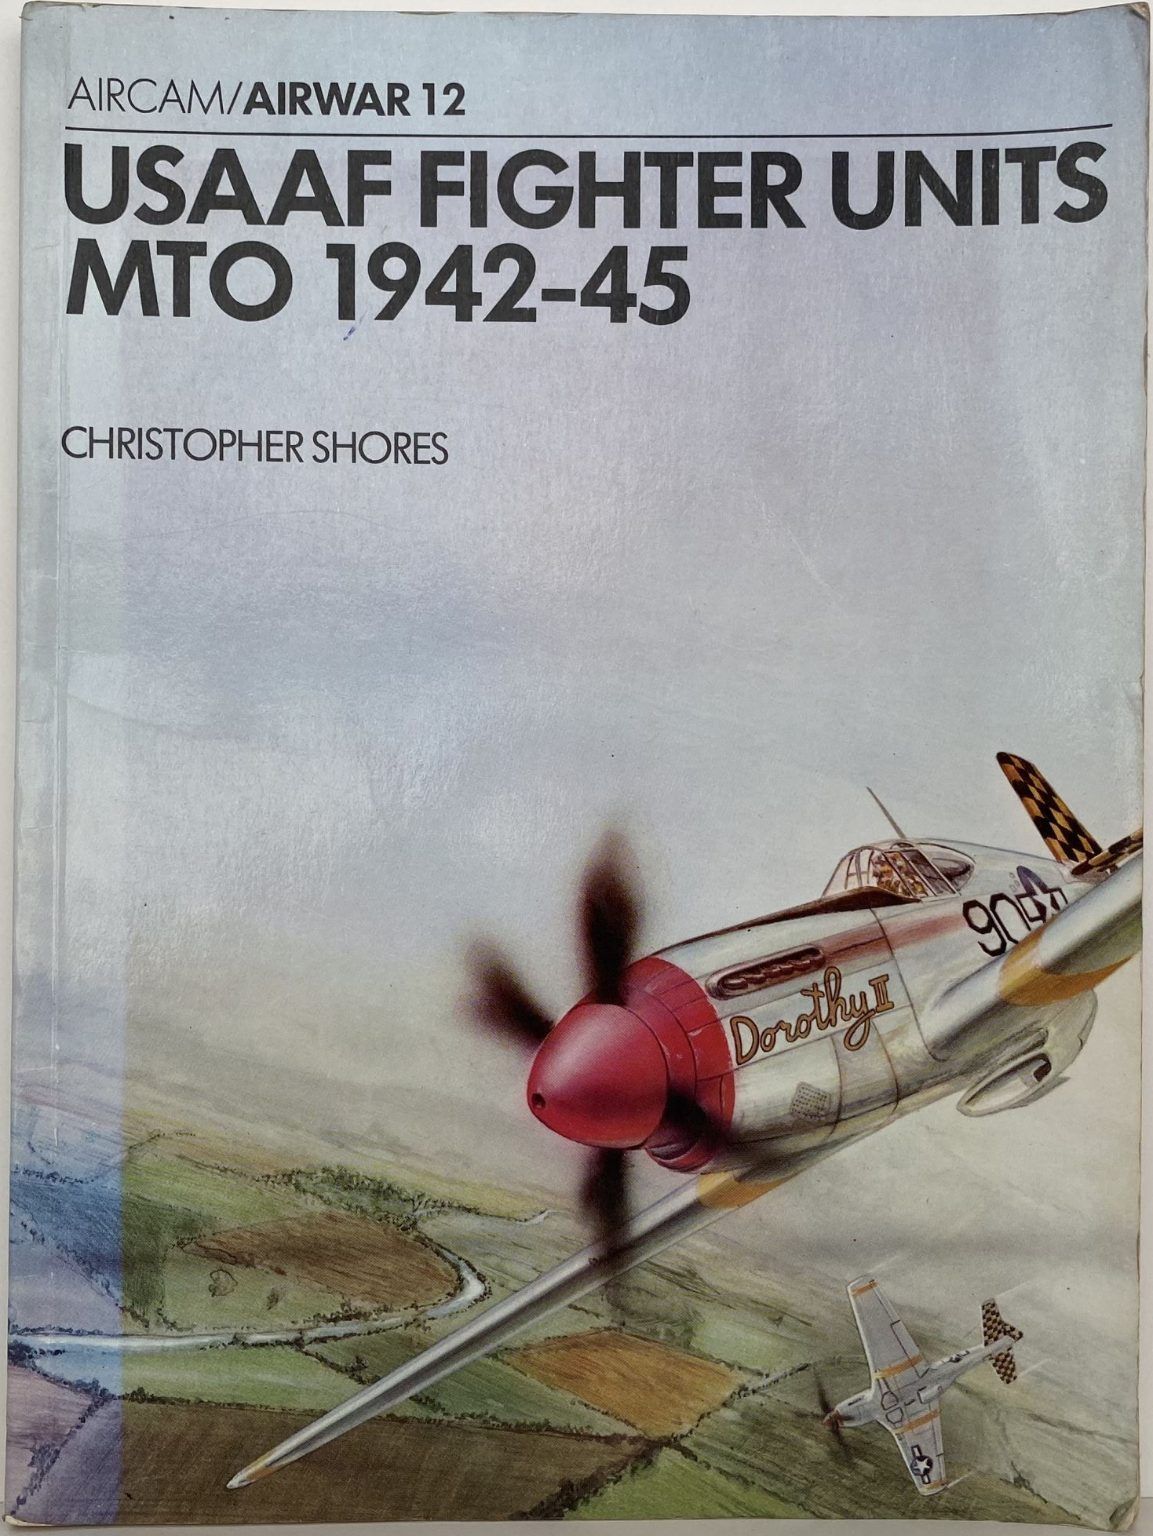 USAAF FIGHTER UNITS: MTO 1942-1945